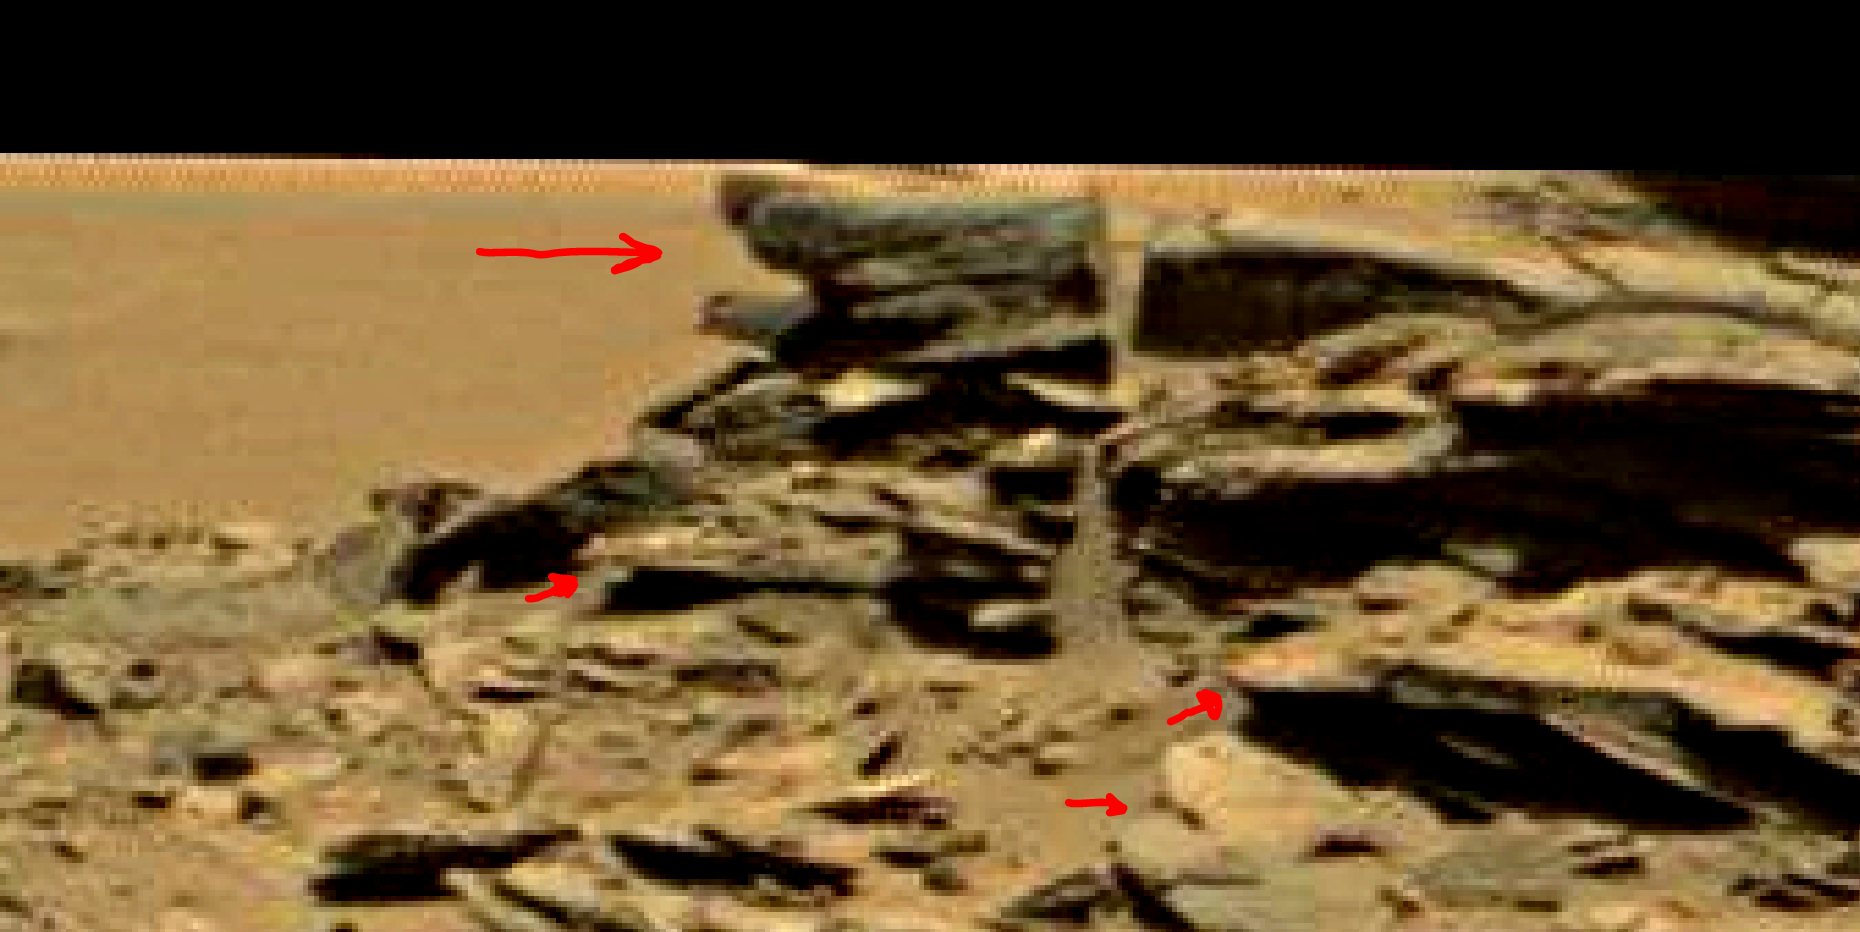 mars sol 1353 anomaly-artifacts 54a1 was life on mars